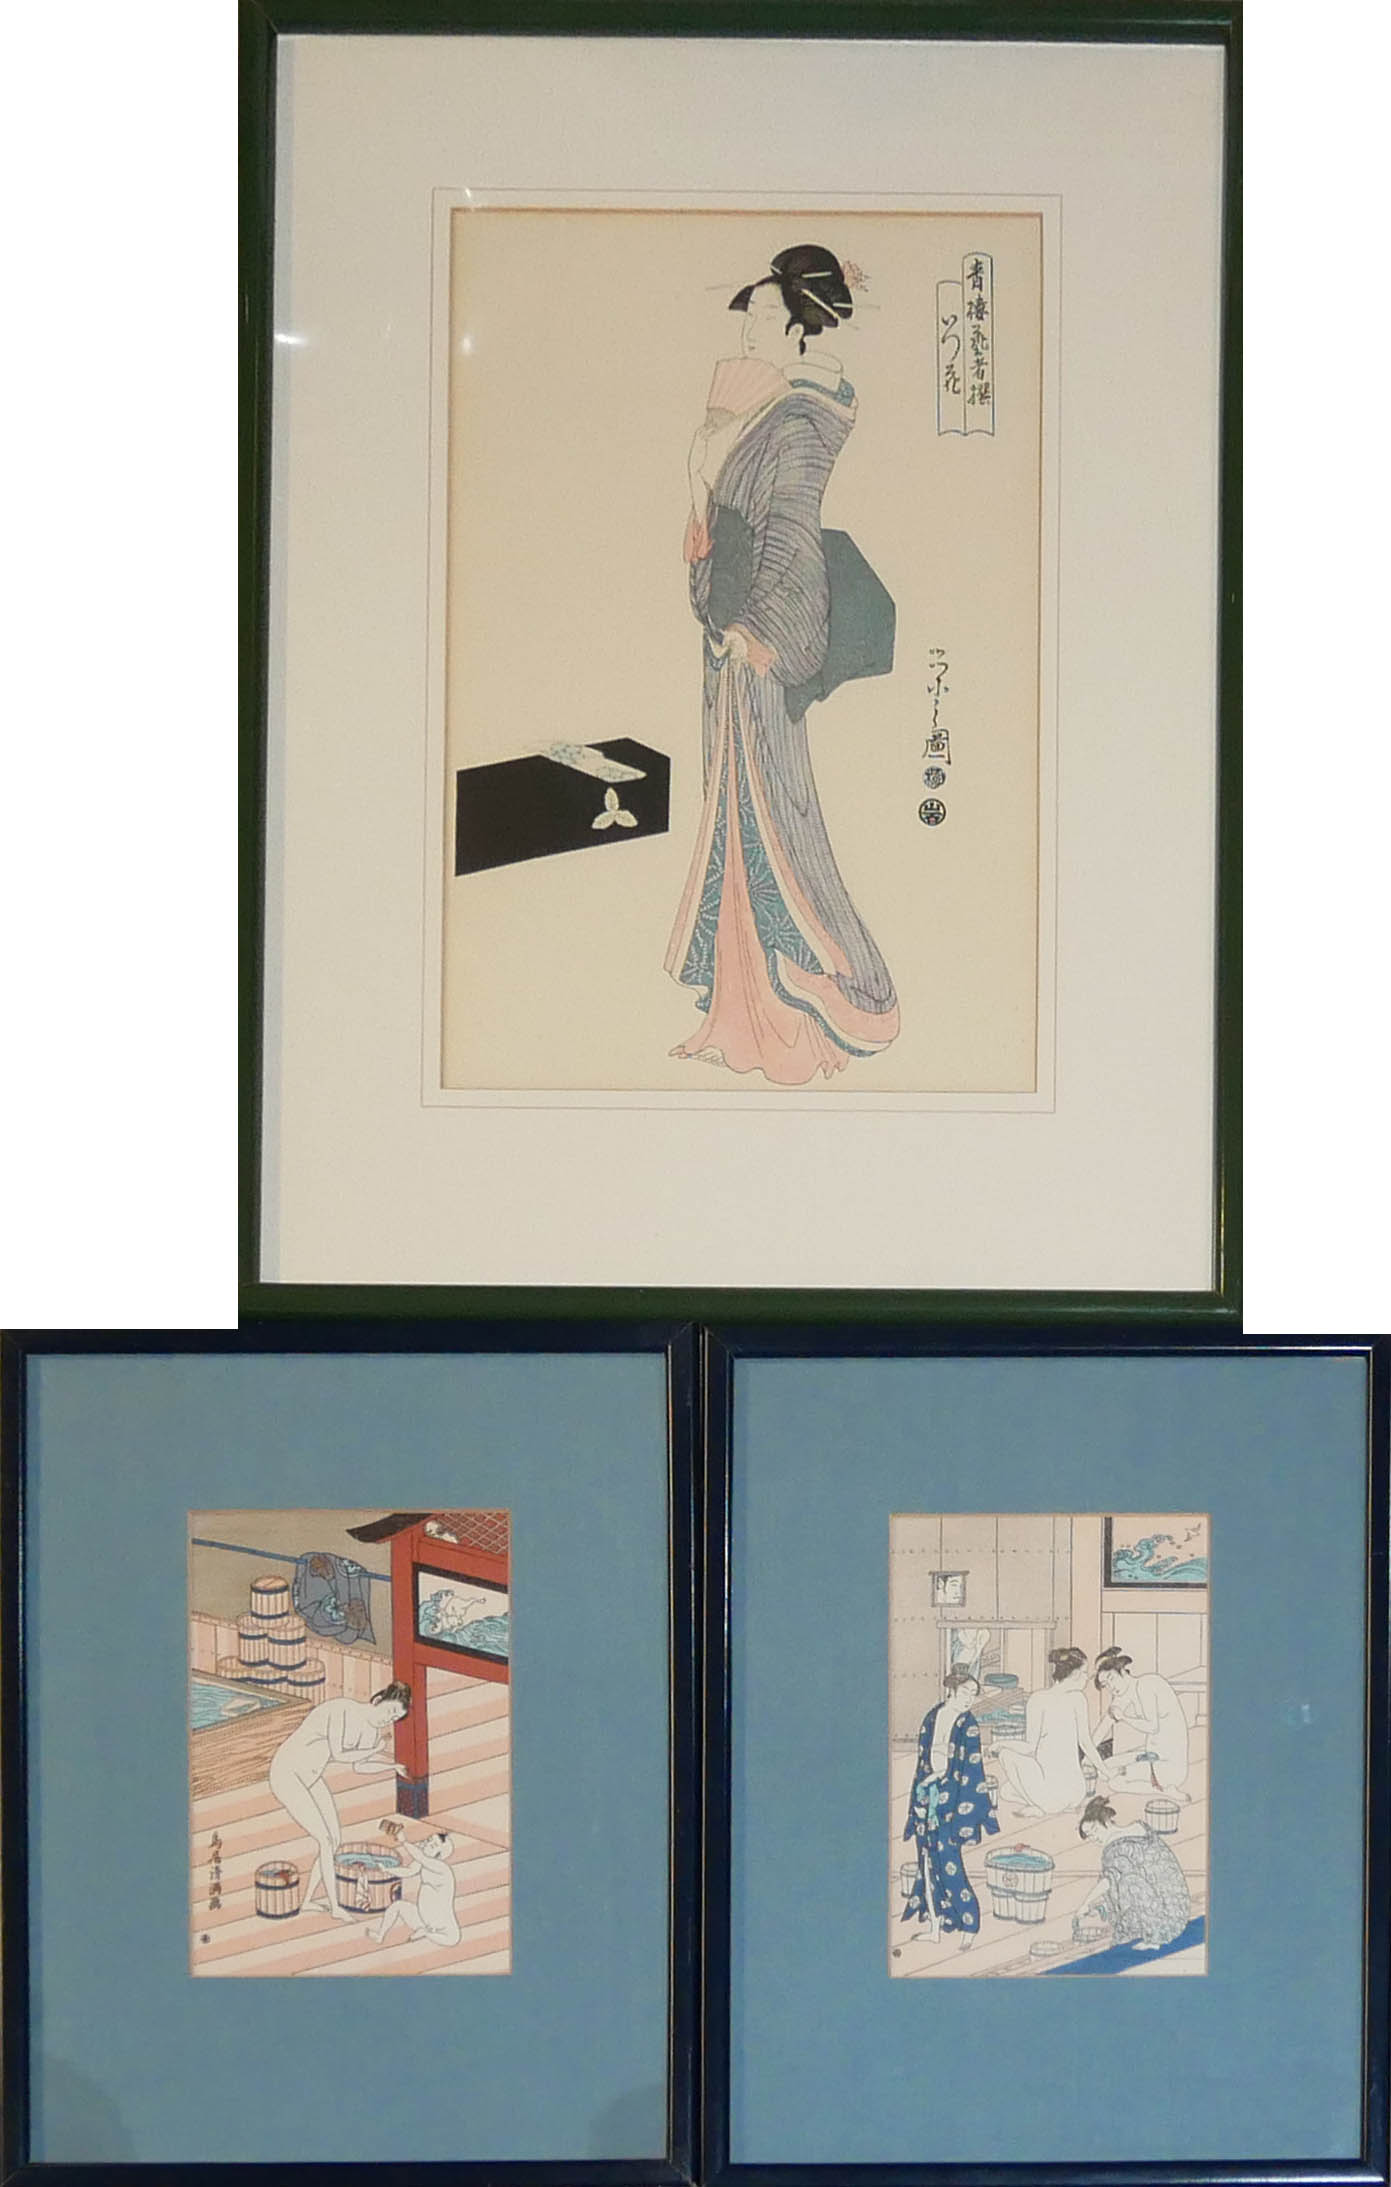 A PAIR OF EARLY 20TH CENTURY JAPANESE SHOWA PERIOD 1926 - 1989 WOODBLOCK PRINTS Both depicting